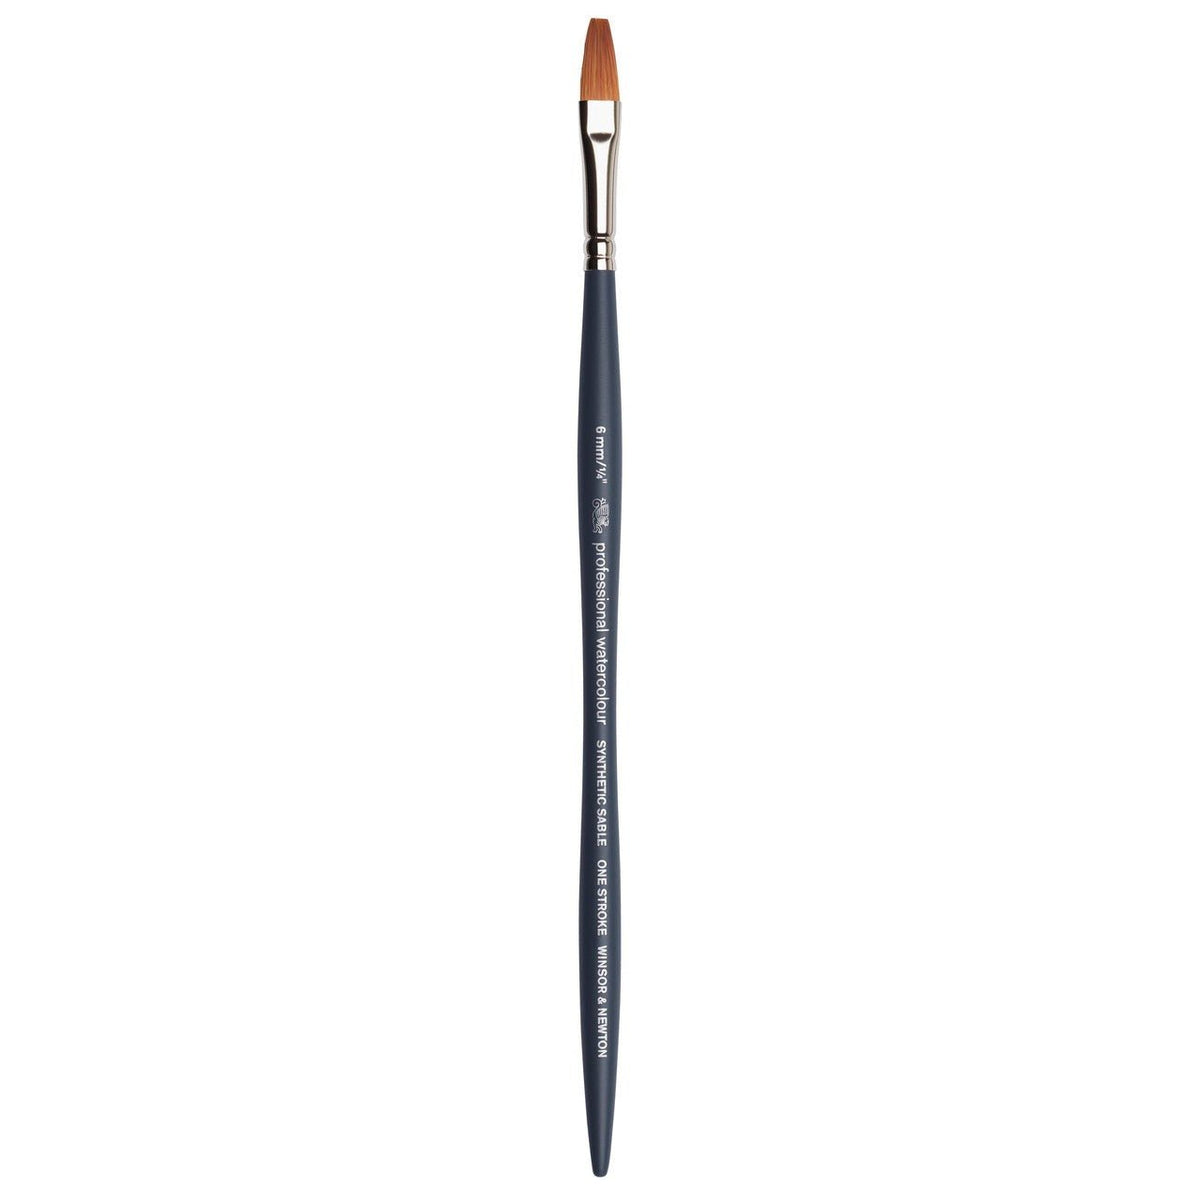 Winsor & Newton Professional Water Color Brush Rigger 3